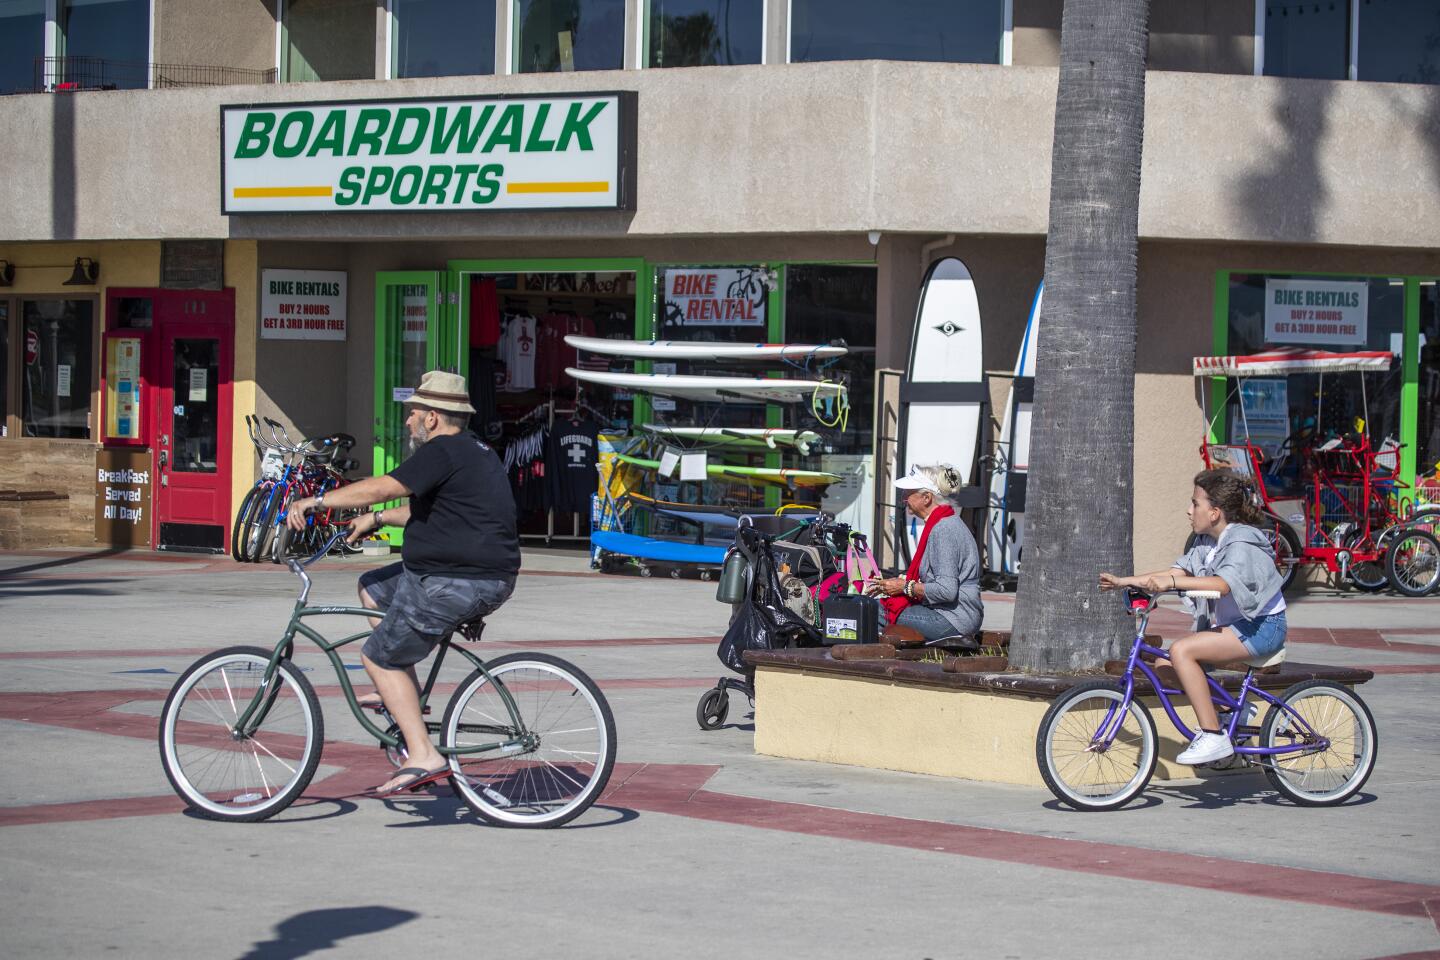 Bicyclists and pass the closed Boardwalk Sports store on the boardwalk in Newport Beach, on Monday. The business is only renting bicycles but is hoping to fully open after Gov. Newsom's announcement that some businesses will be able to reopen.